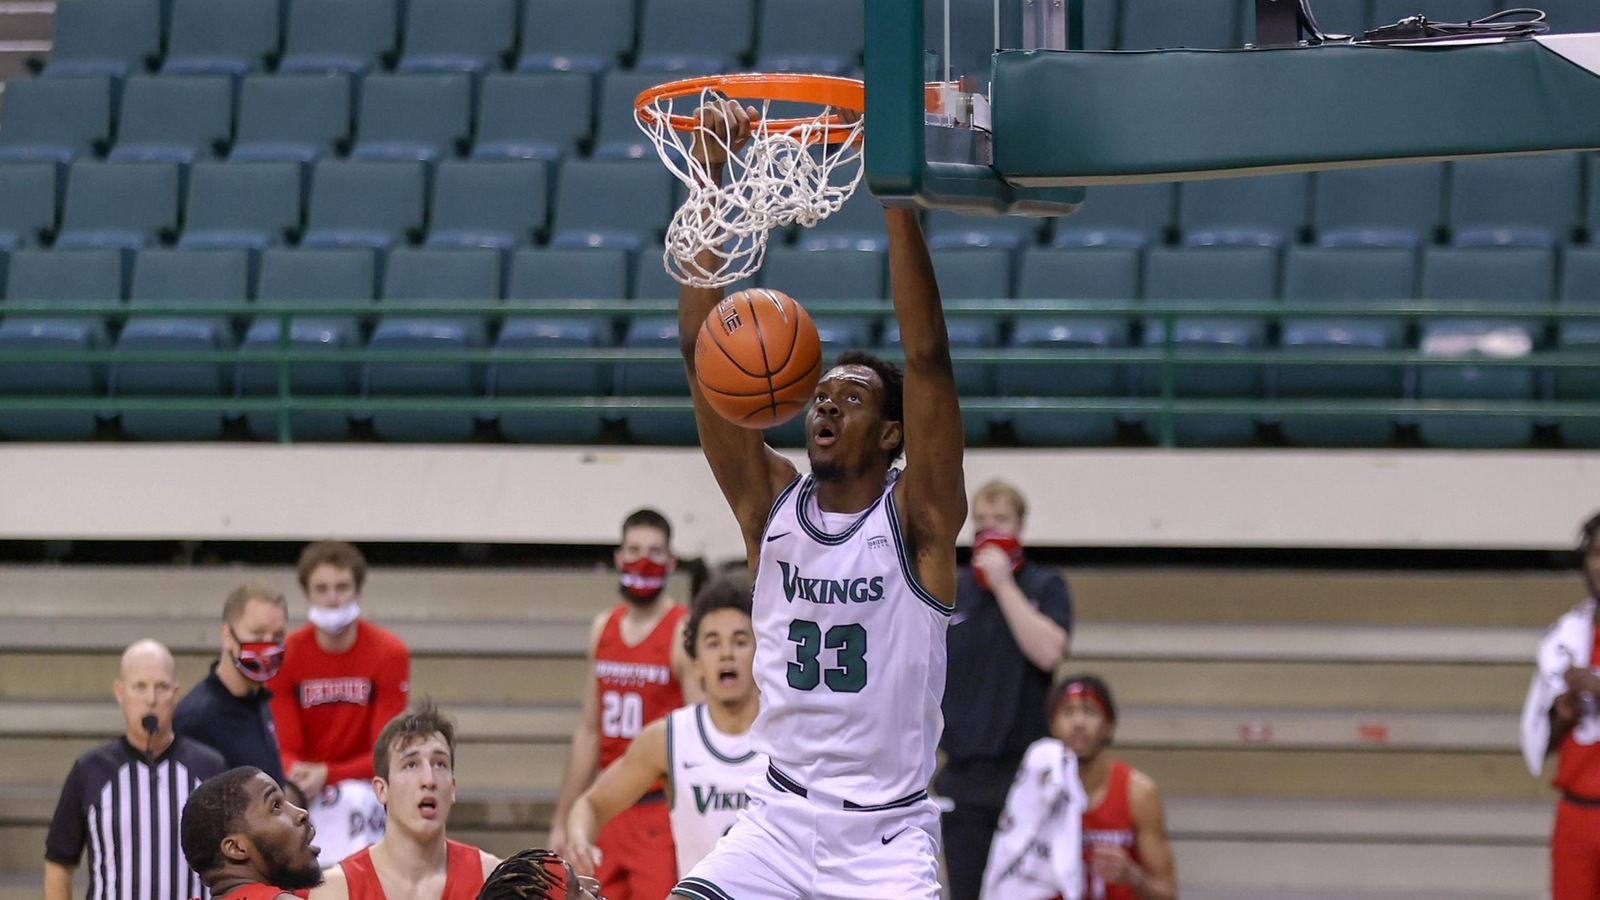 Cleveland State's Contest at Wright State to Air on ESPNU